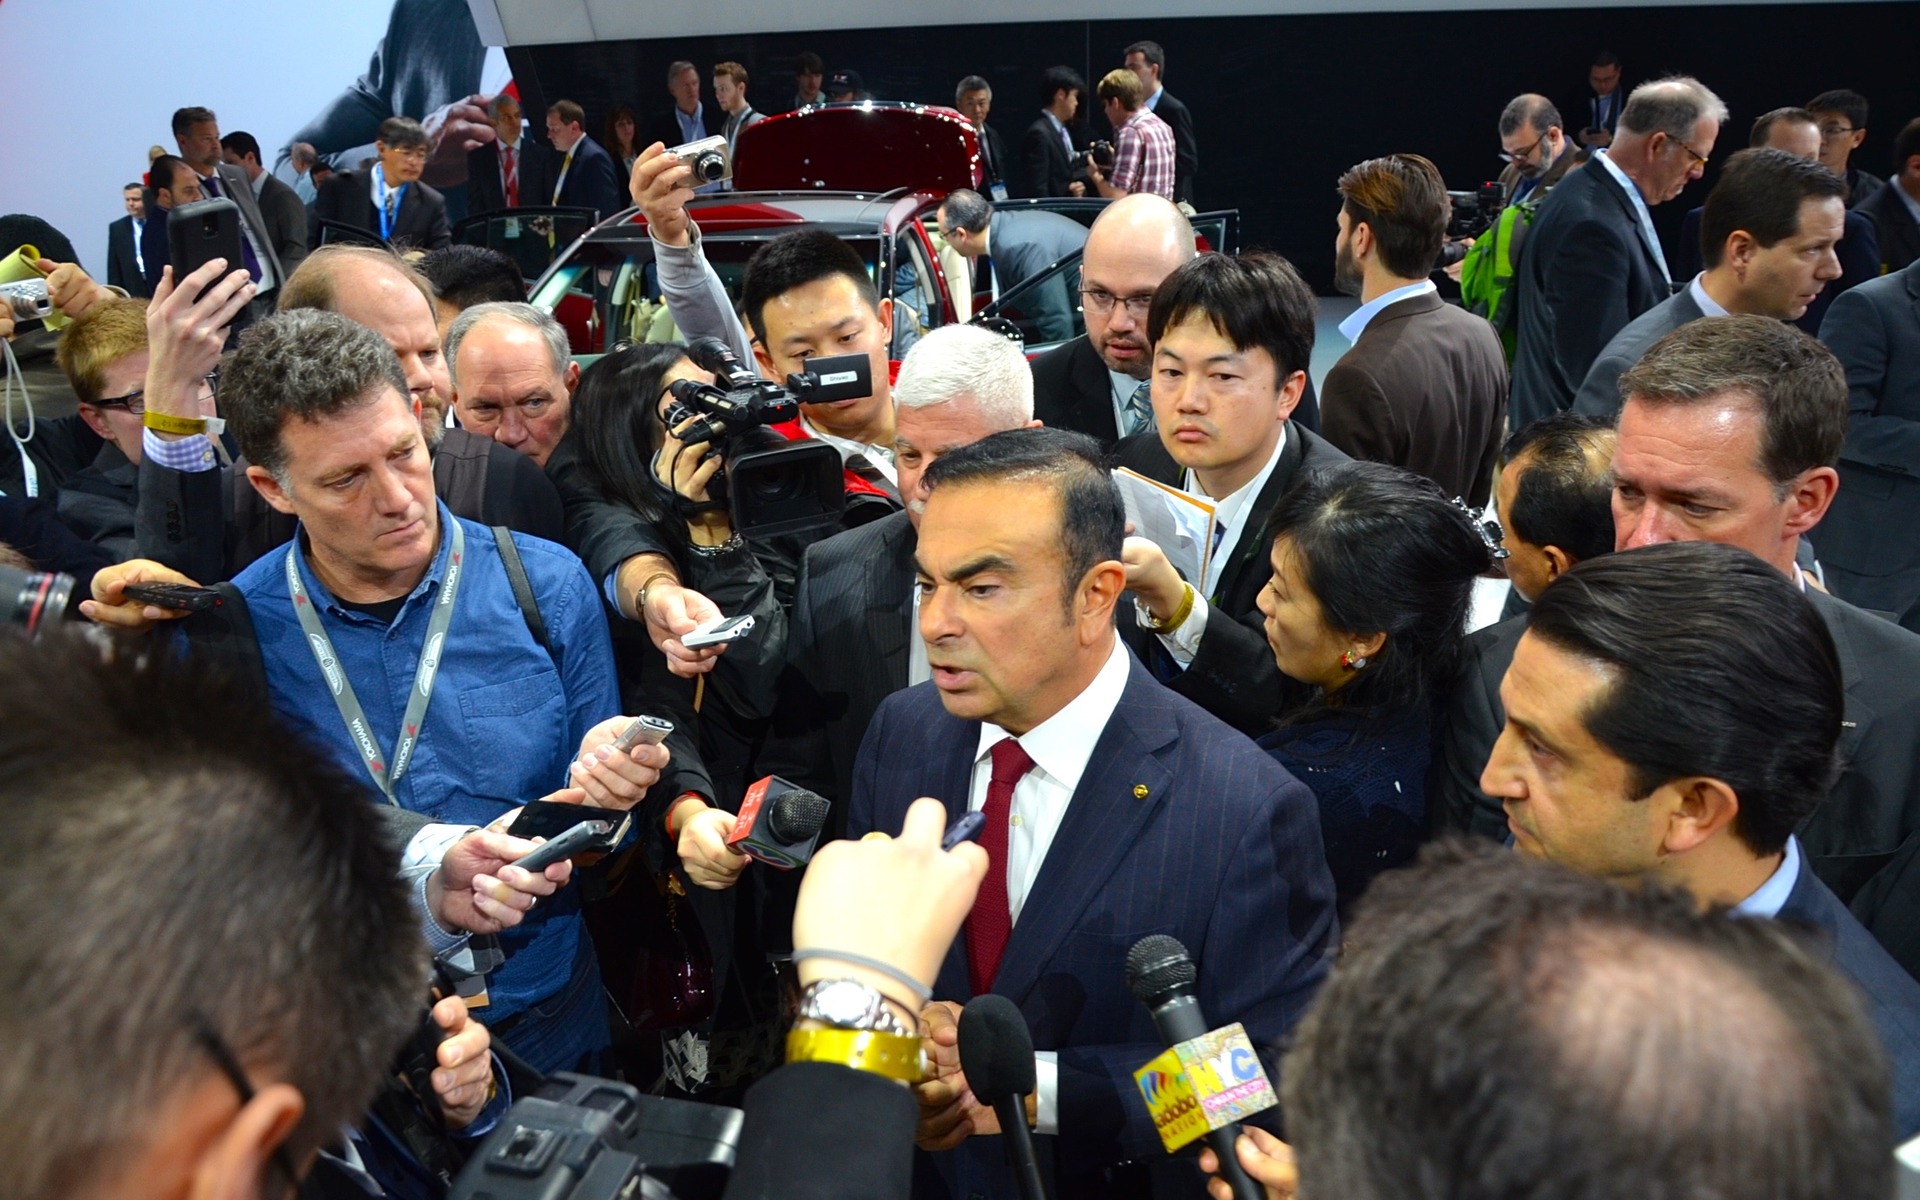 Carlos Ghosn, Chairman and CEO of Nissan at the 2015 New York Auto Show